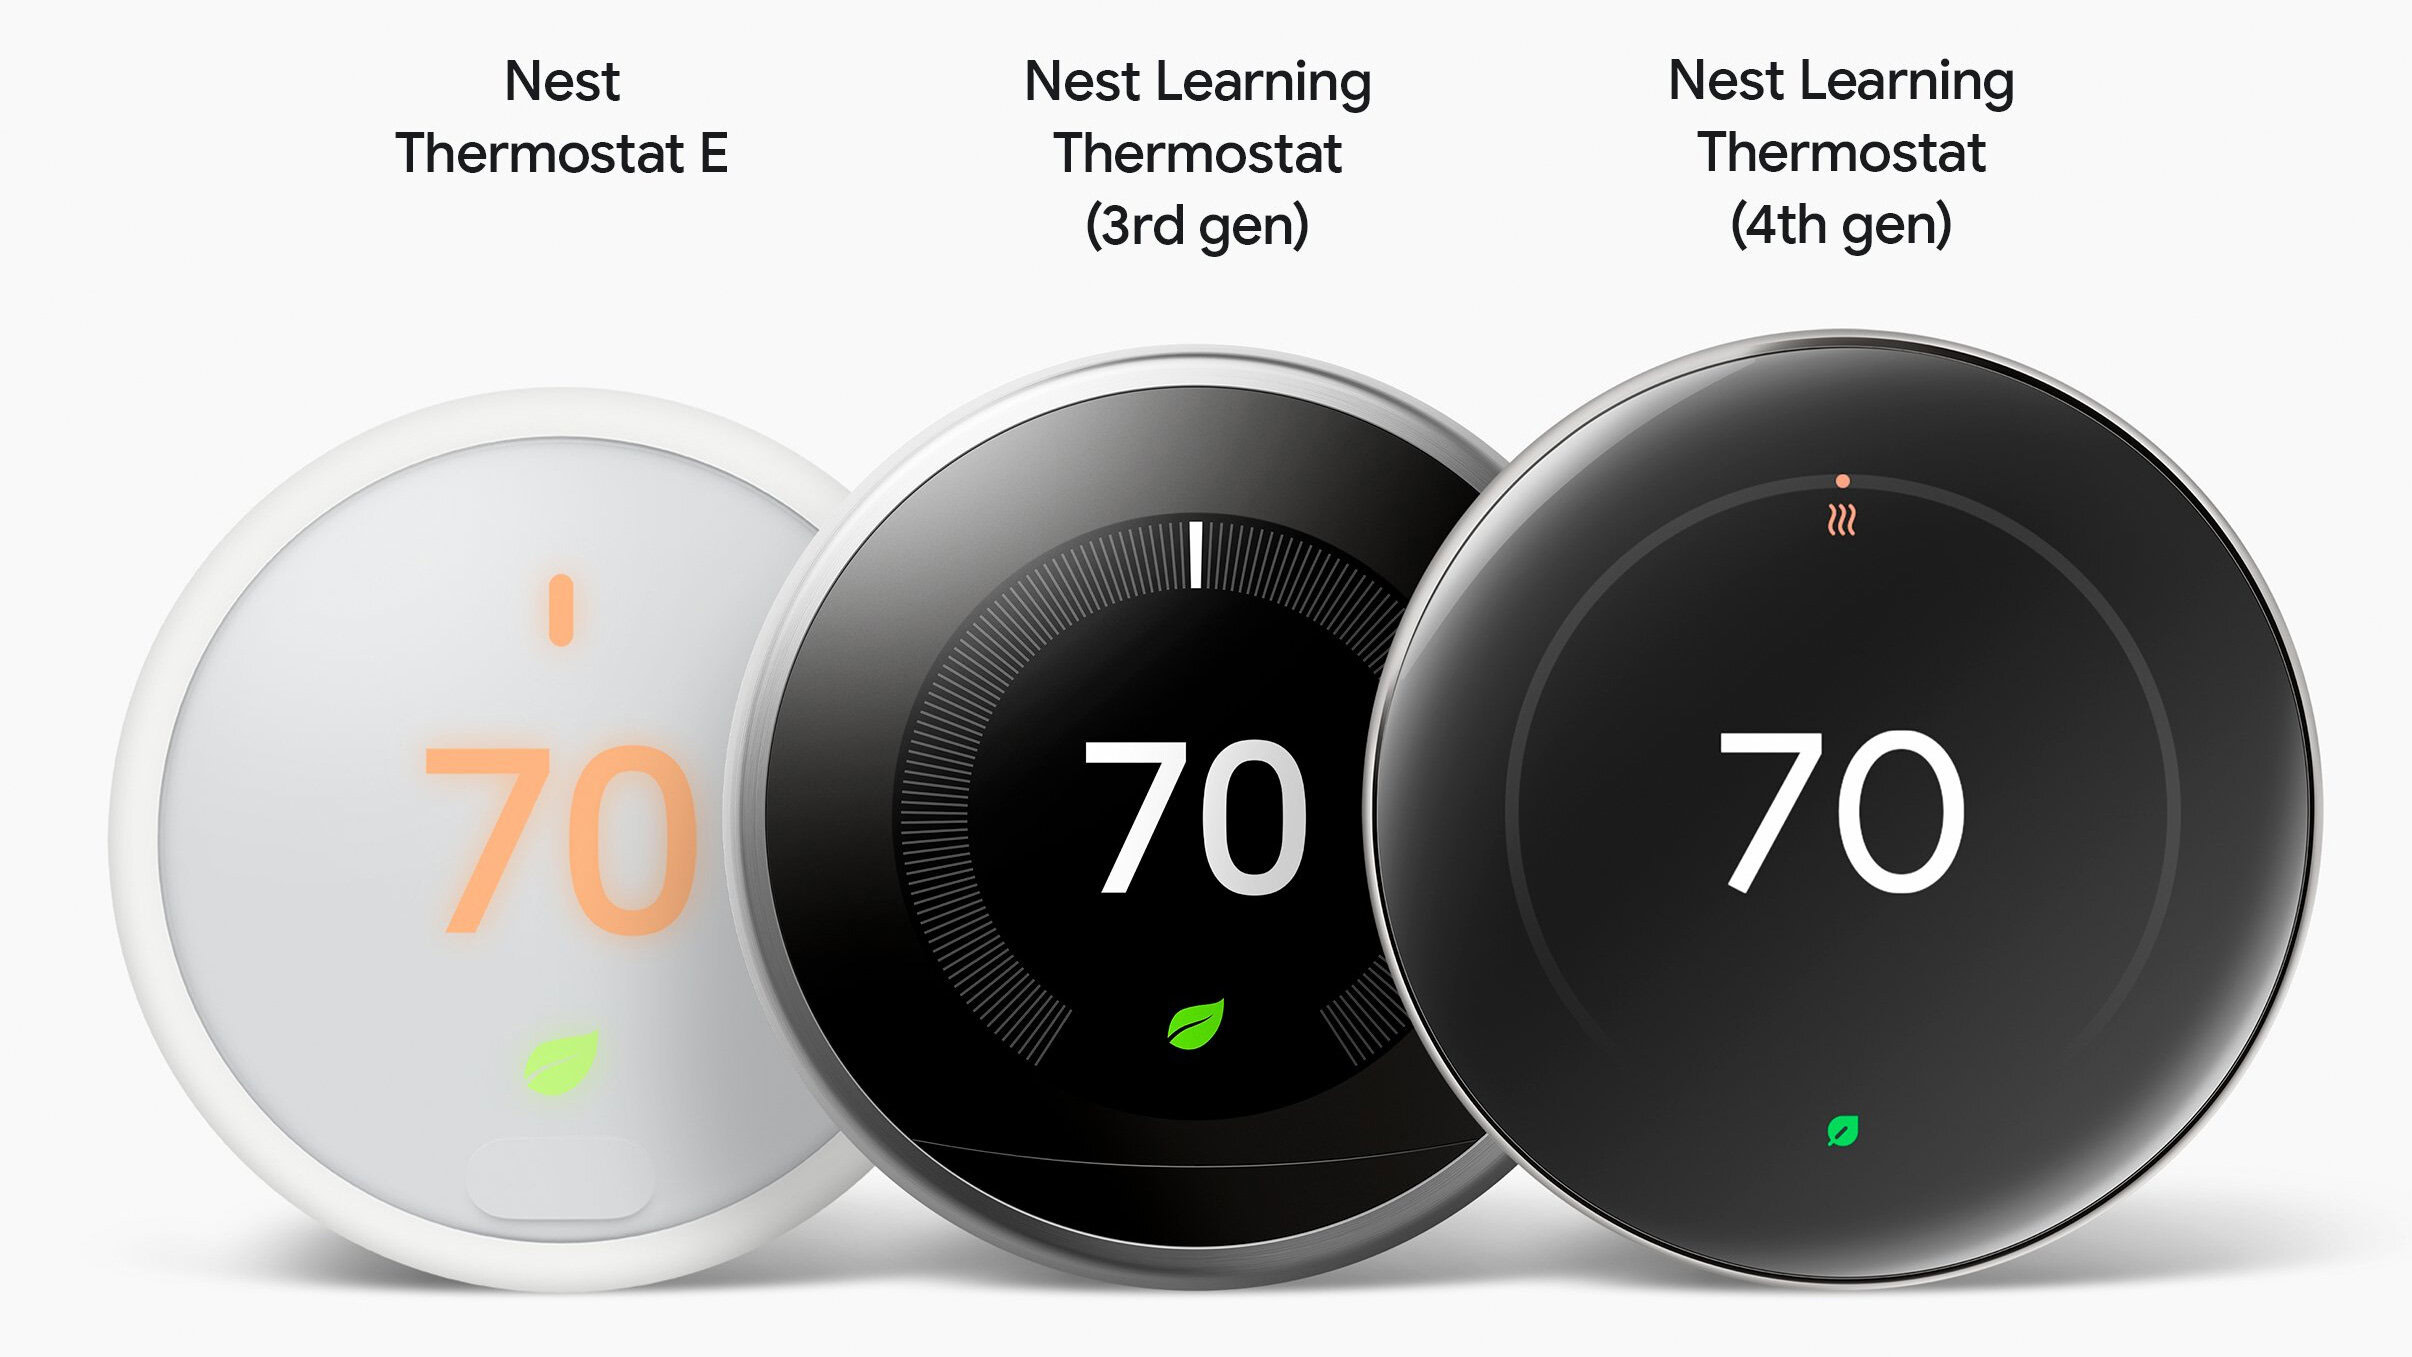 A new Nest Learning Thermostat looks like it’s finally on the way